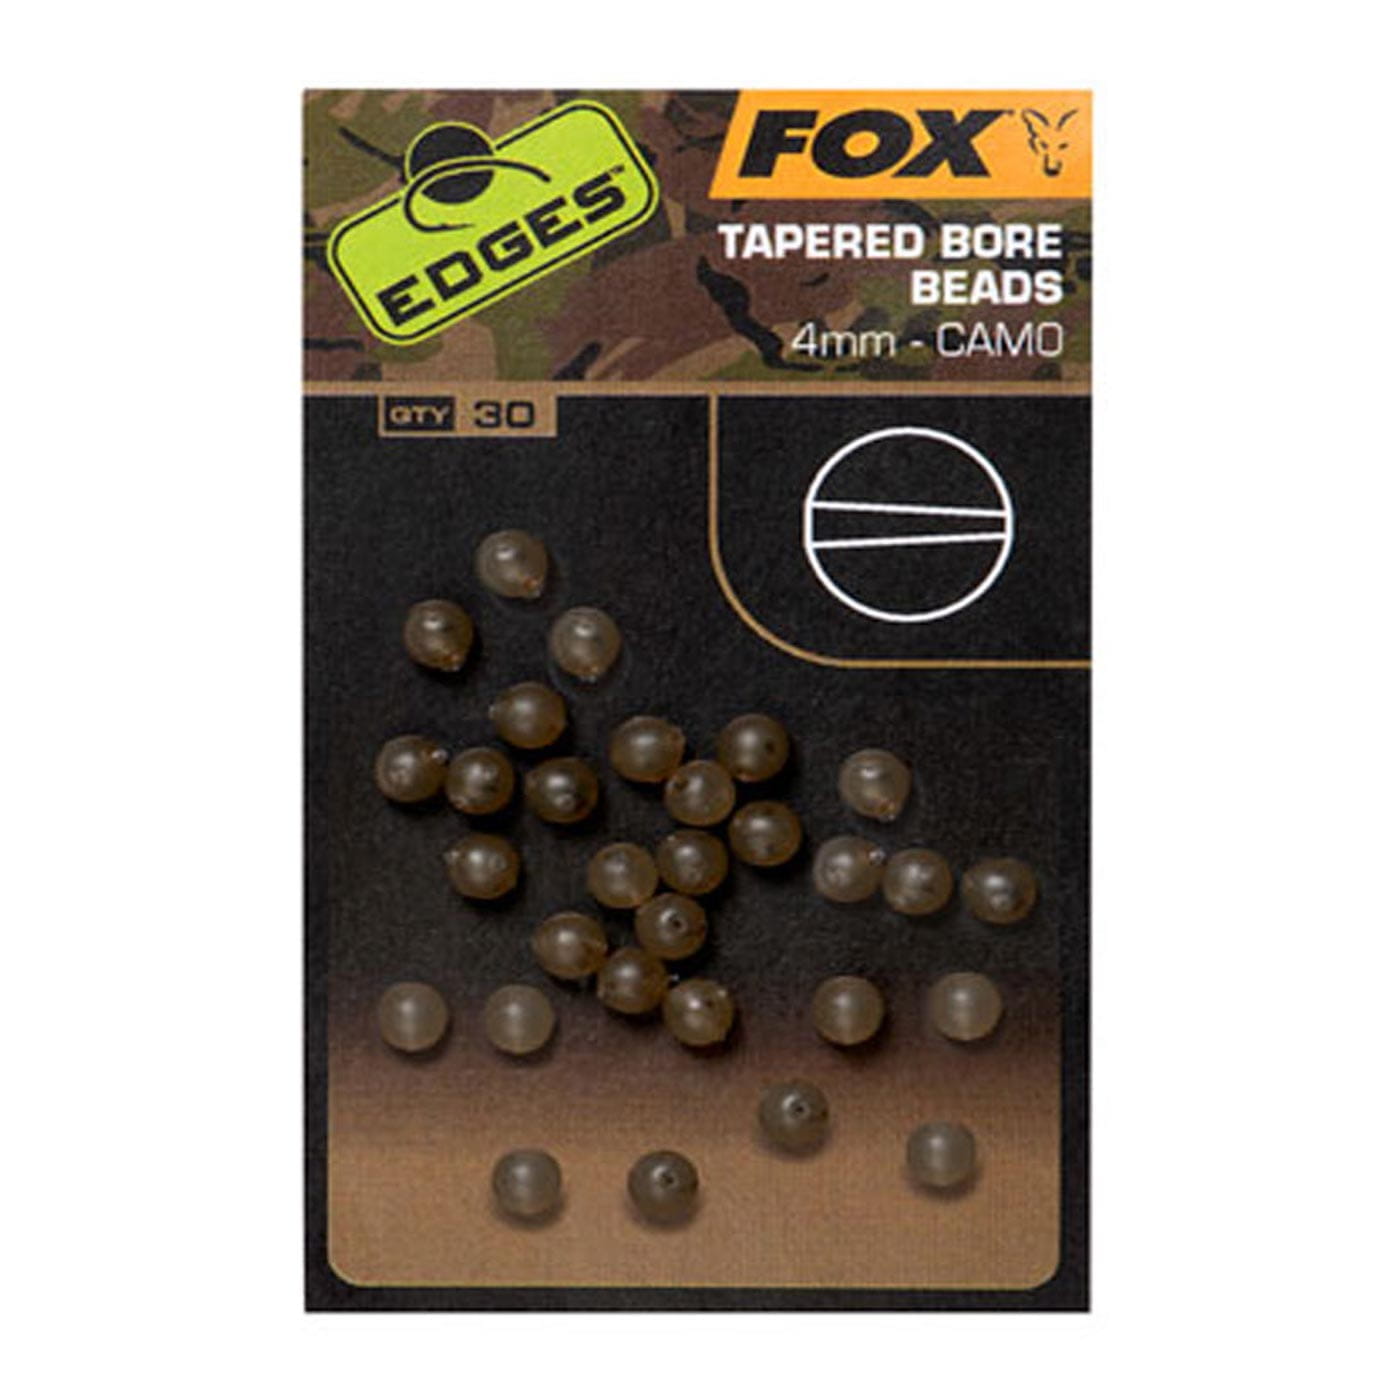 Edges Camo Tapered Bore Bead 4mm